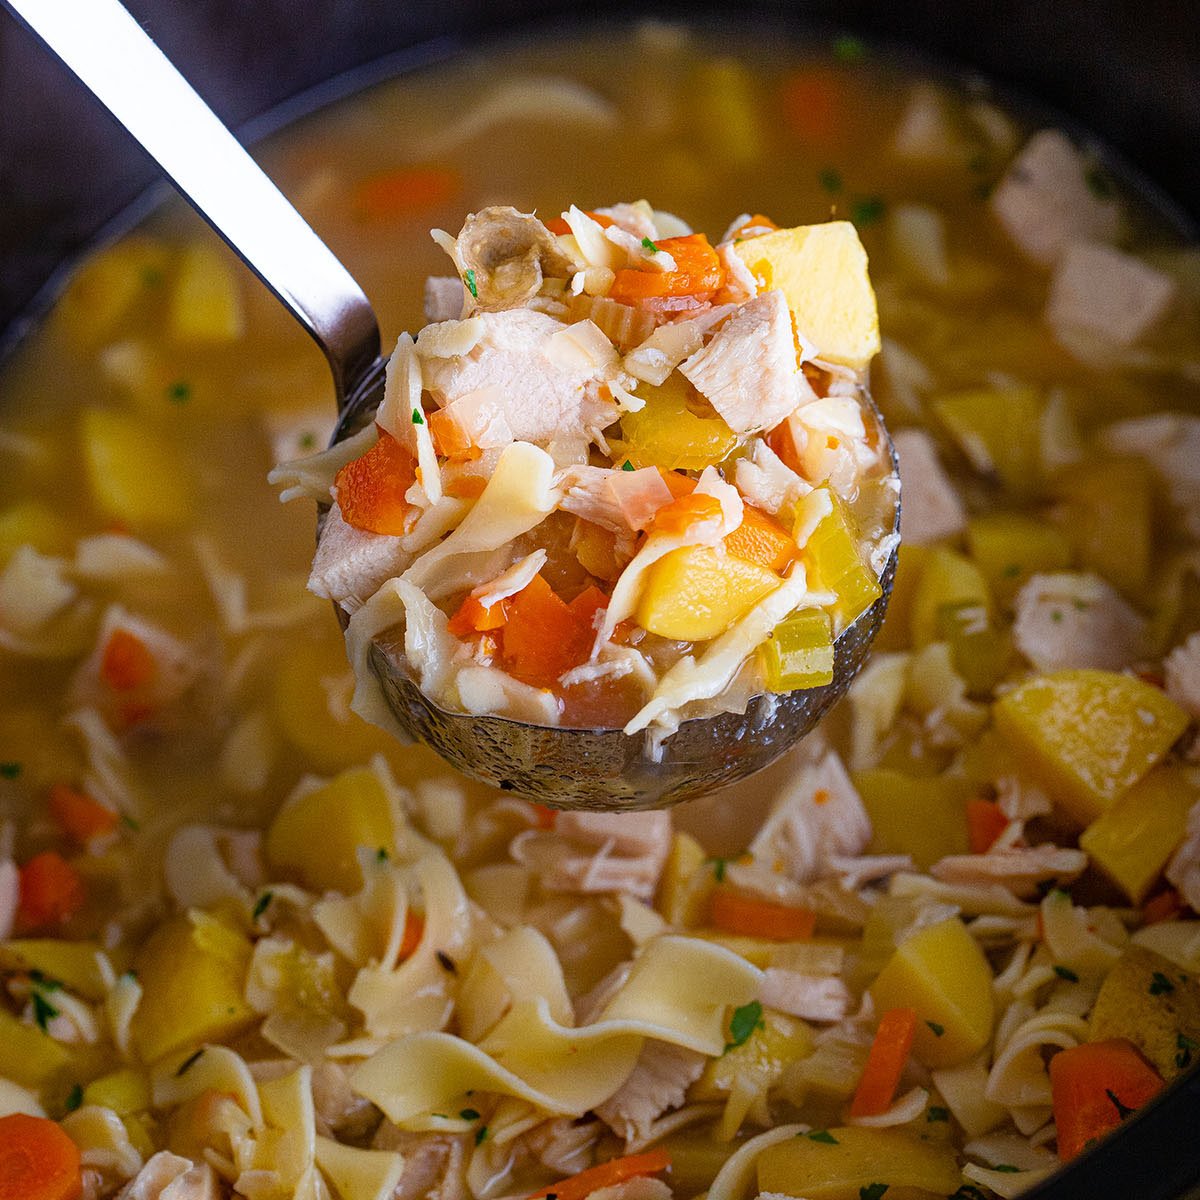 Homemade Turkey Noodle Soup - Spend With Pennies